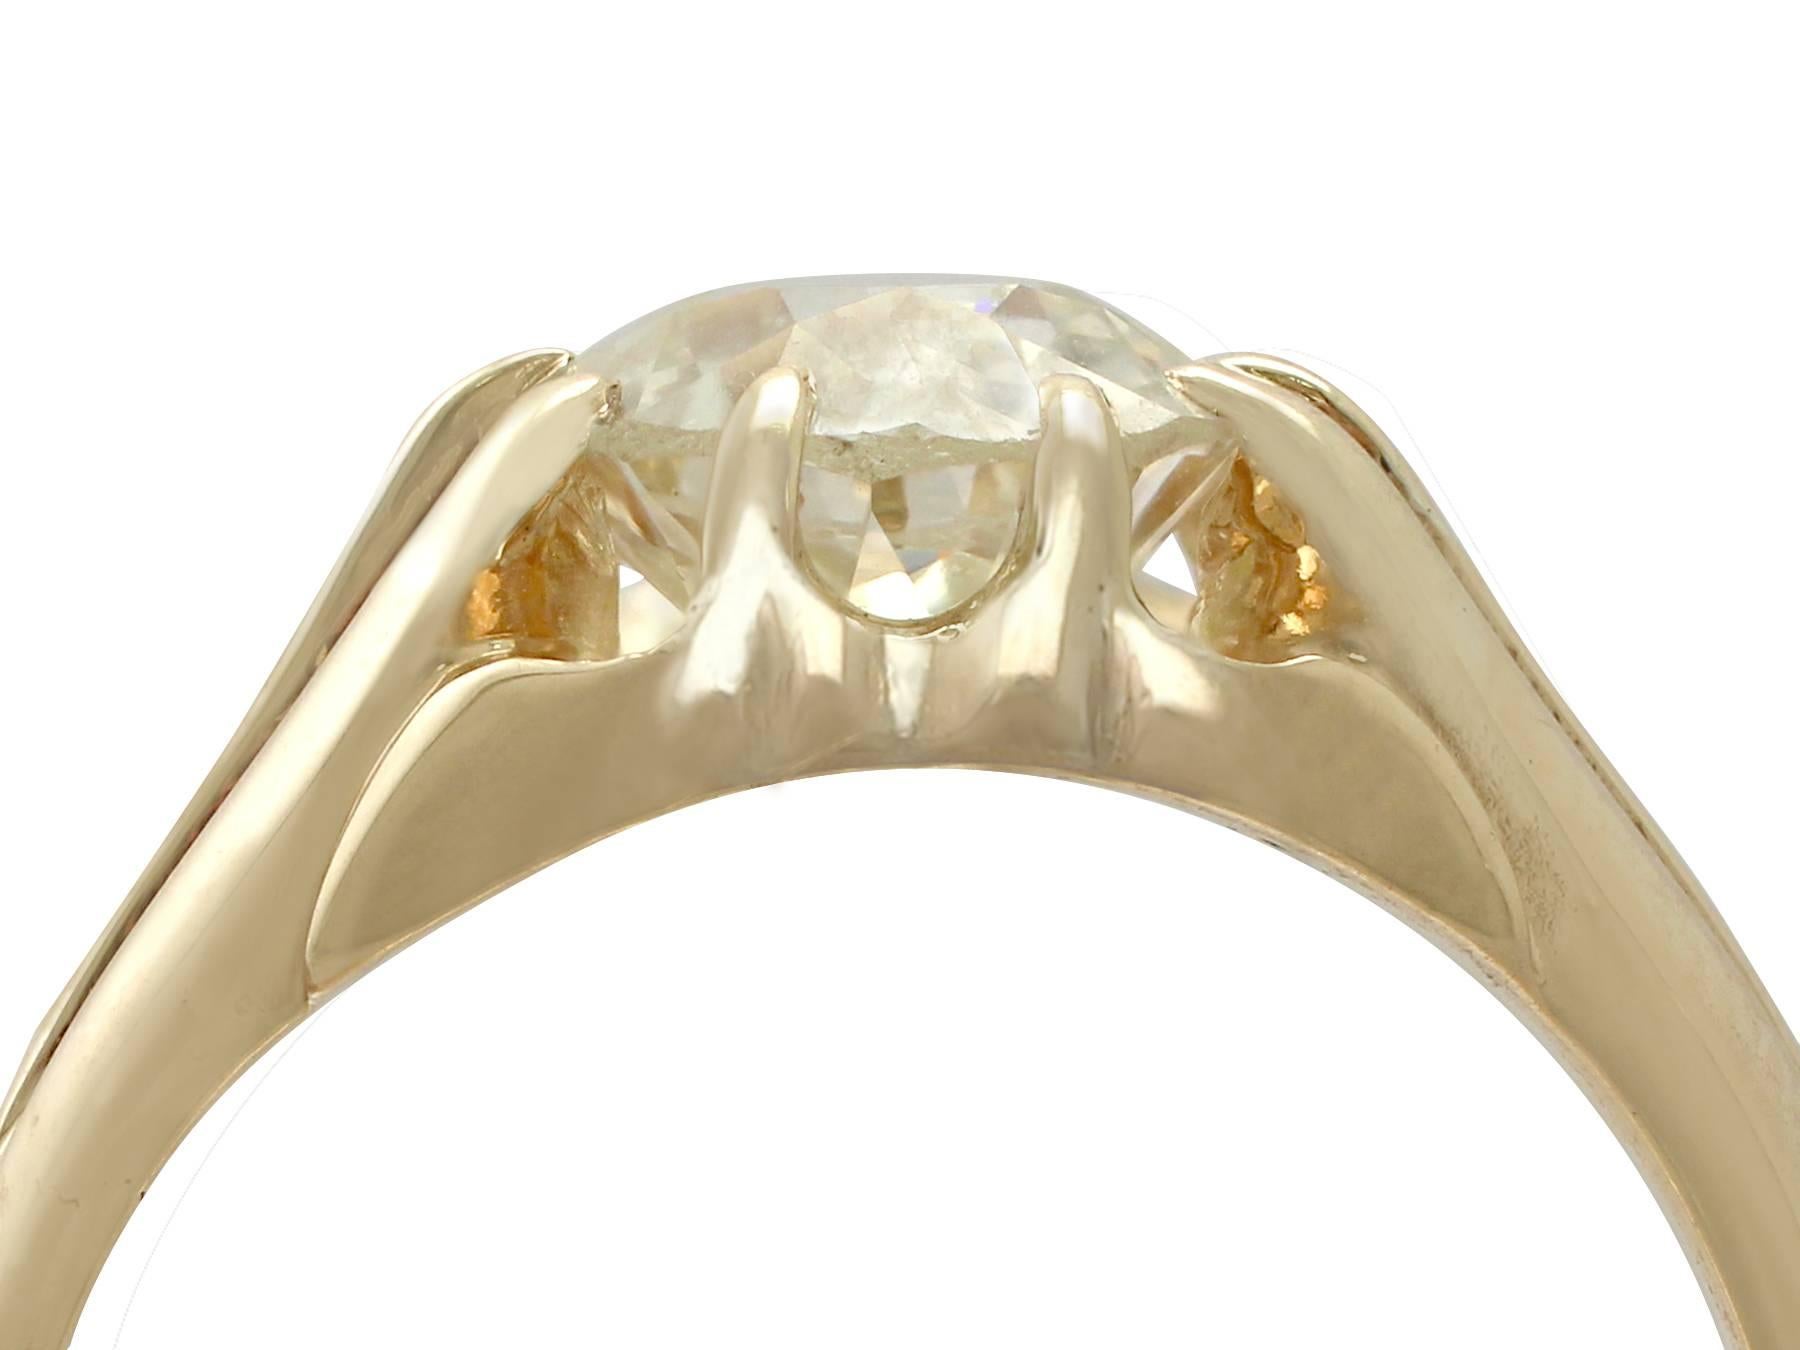 A stunning antique 2.28 carat diamond and 18 carat yellow gold men's solitaire ring; part of our diverse antique jewelry and estate jewelry collections.

This stunning, fine and impressive men's diamond solitaire ring has been crafted in 18 ct